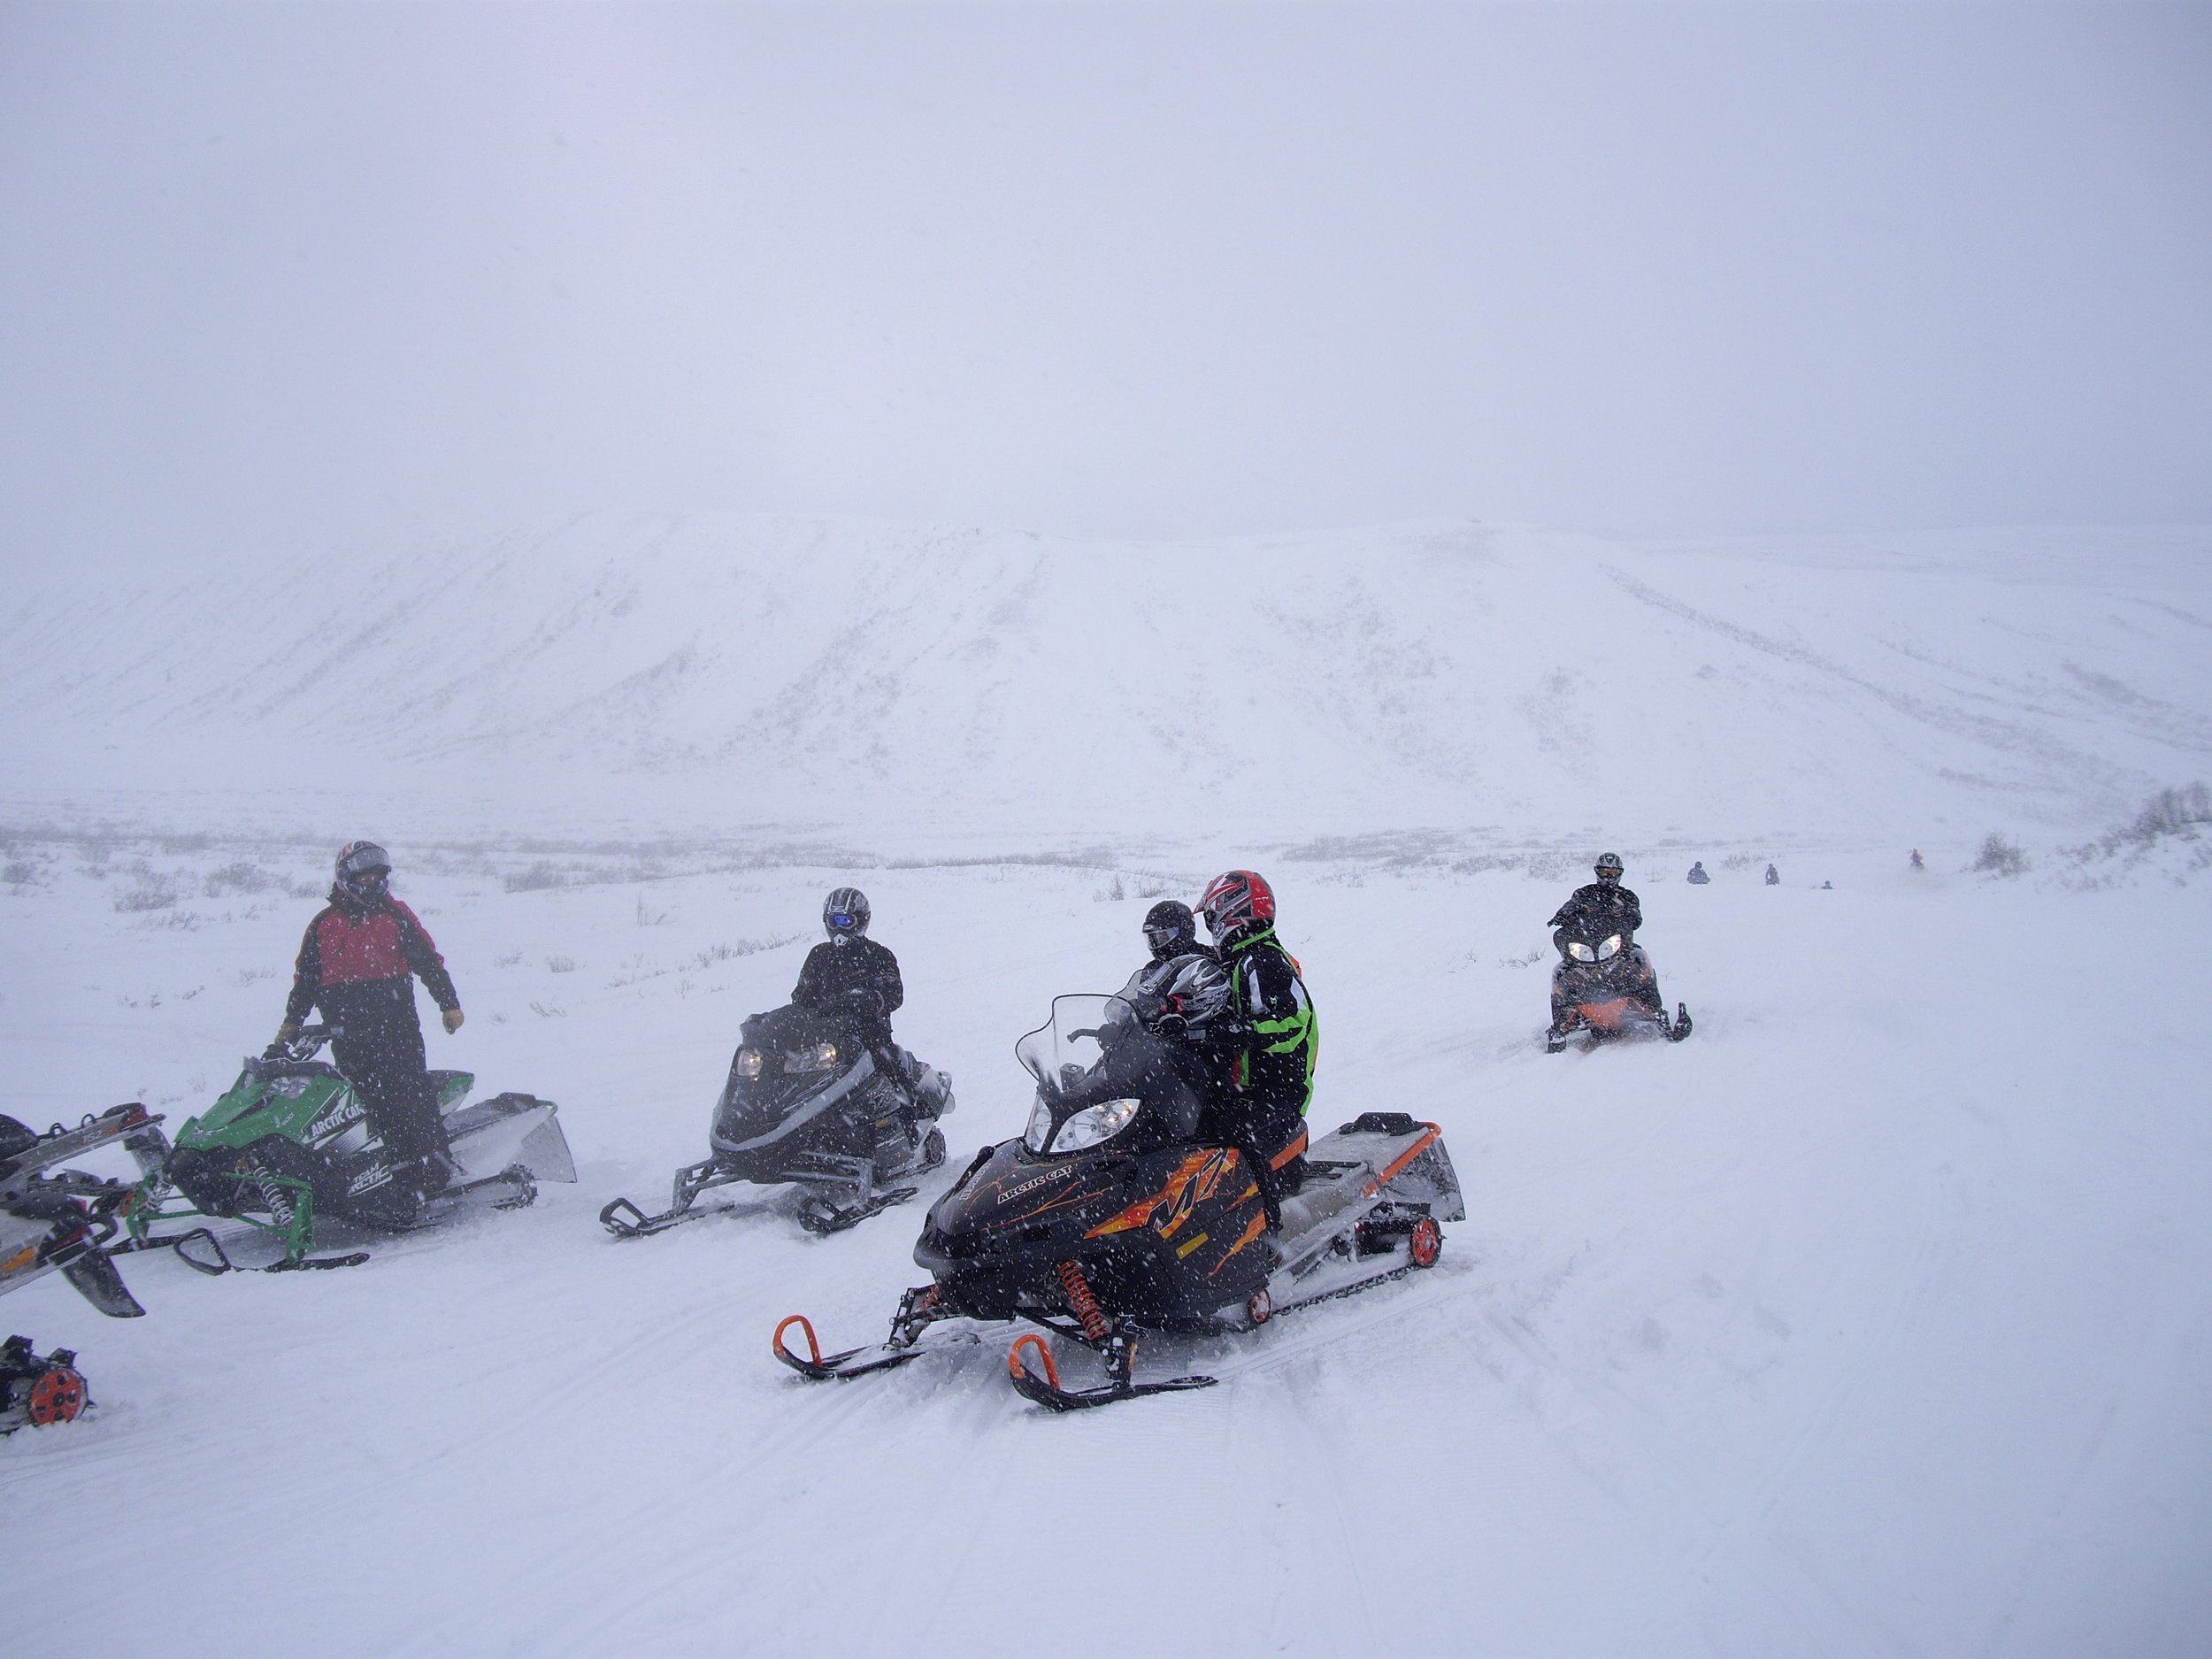   A group of riders stop to discuss conditions. Photo by Debra McGhan  